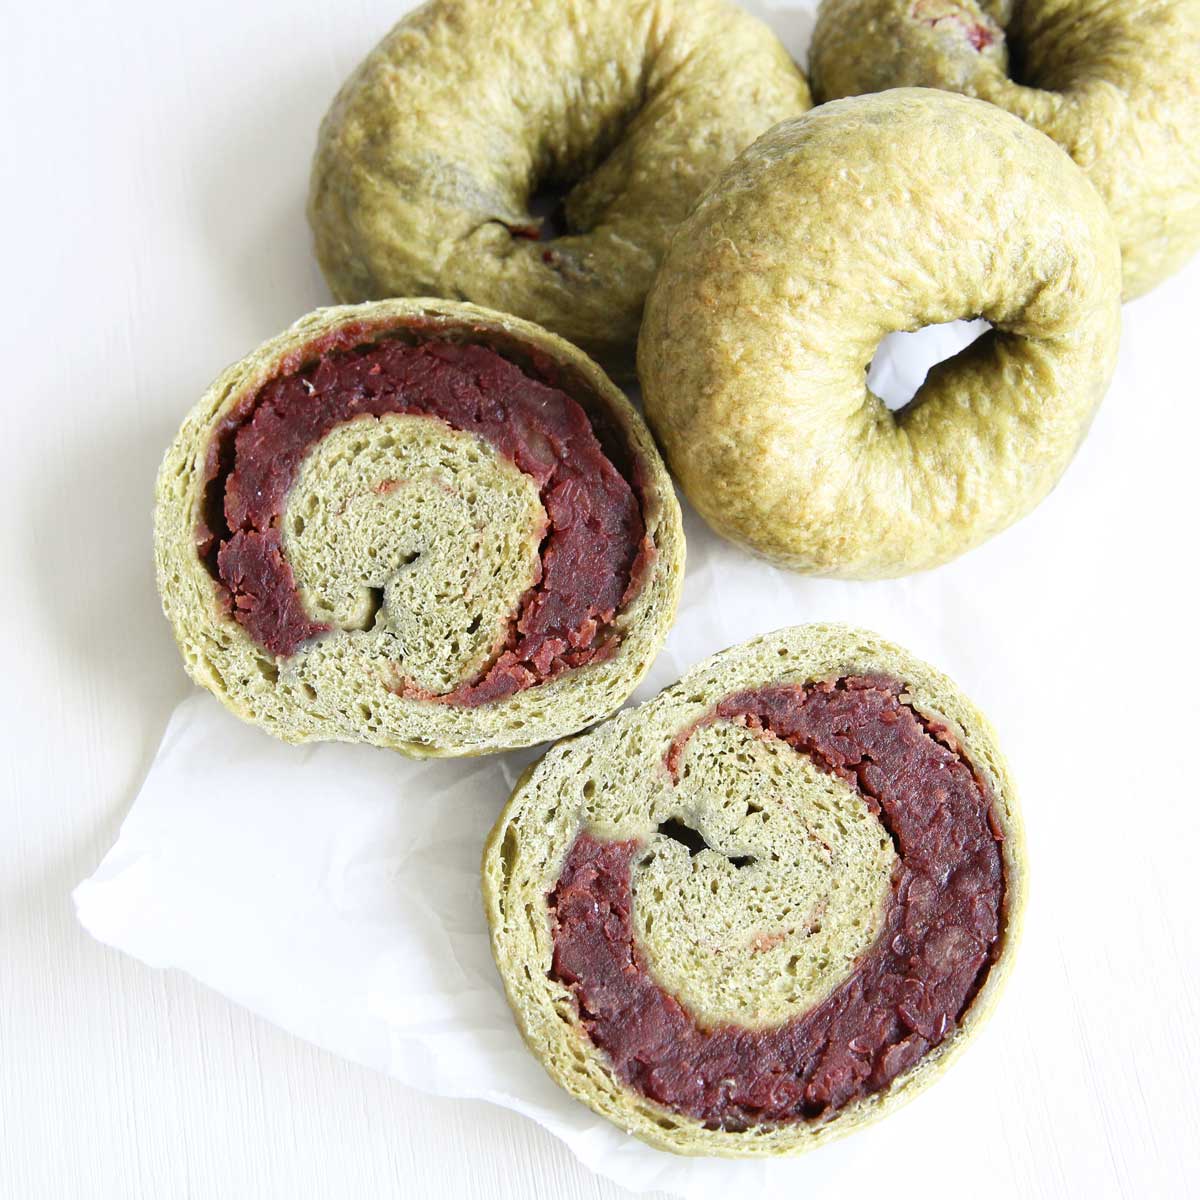 Homemade Applesauce Matcha Bagels with Red Bean Paste Filling - Sweet Matcha Whipped Cream